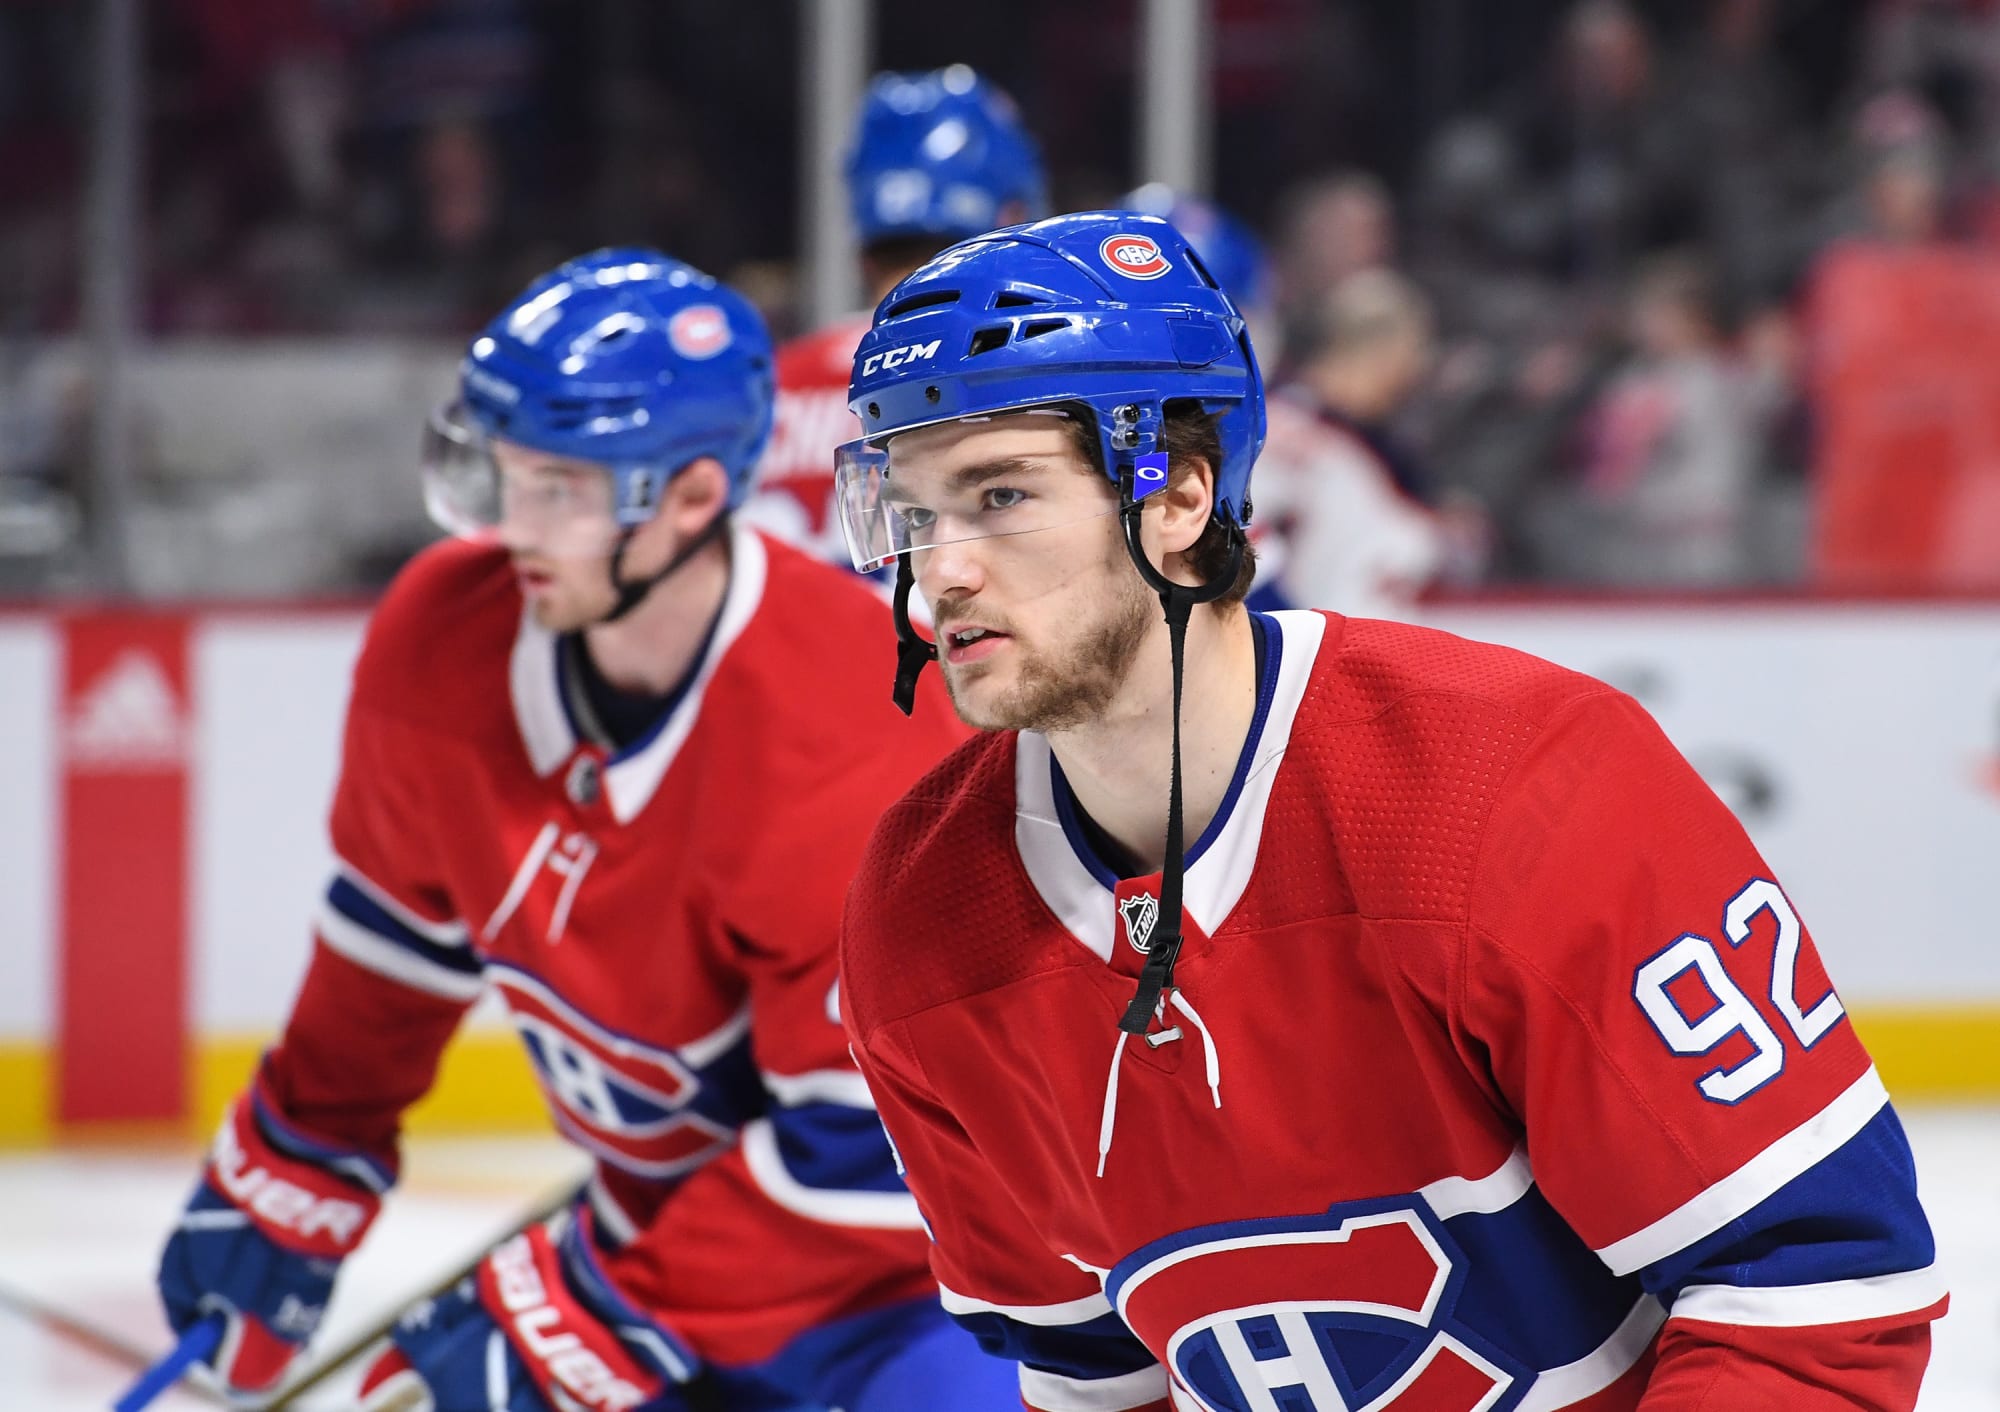 Mikhail Sergachev has more points than any current Canadiens